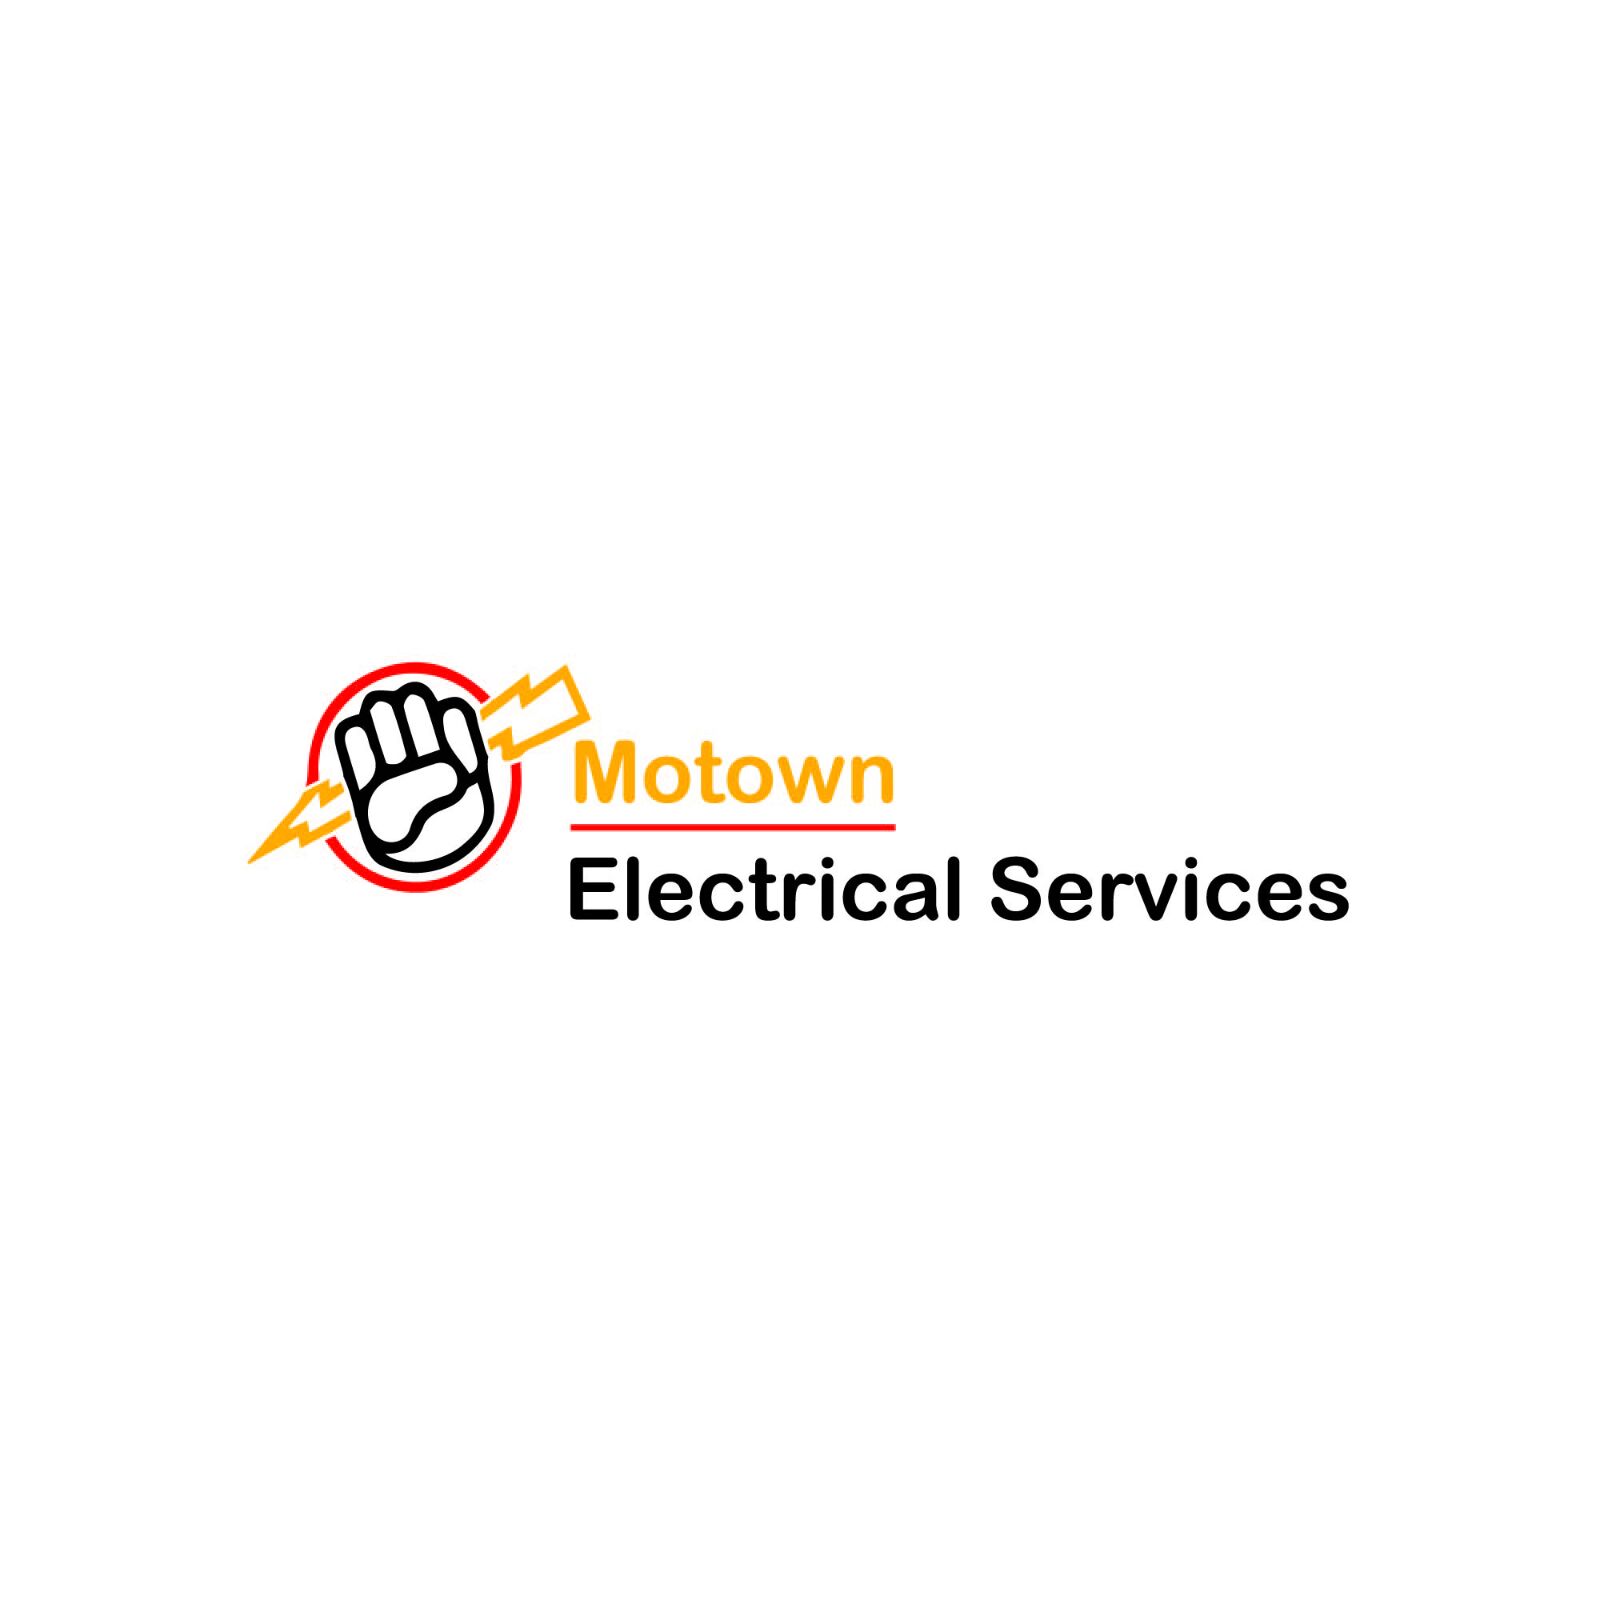 Motown Electrical Services